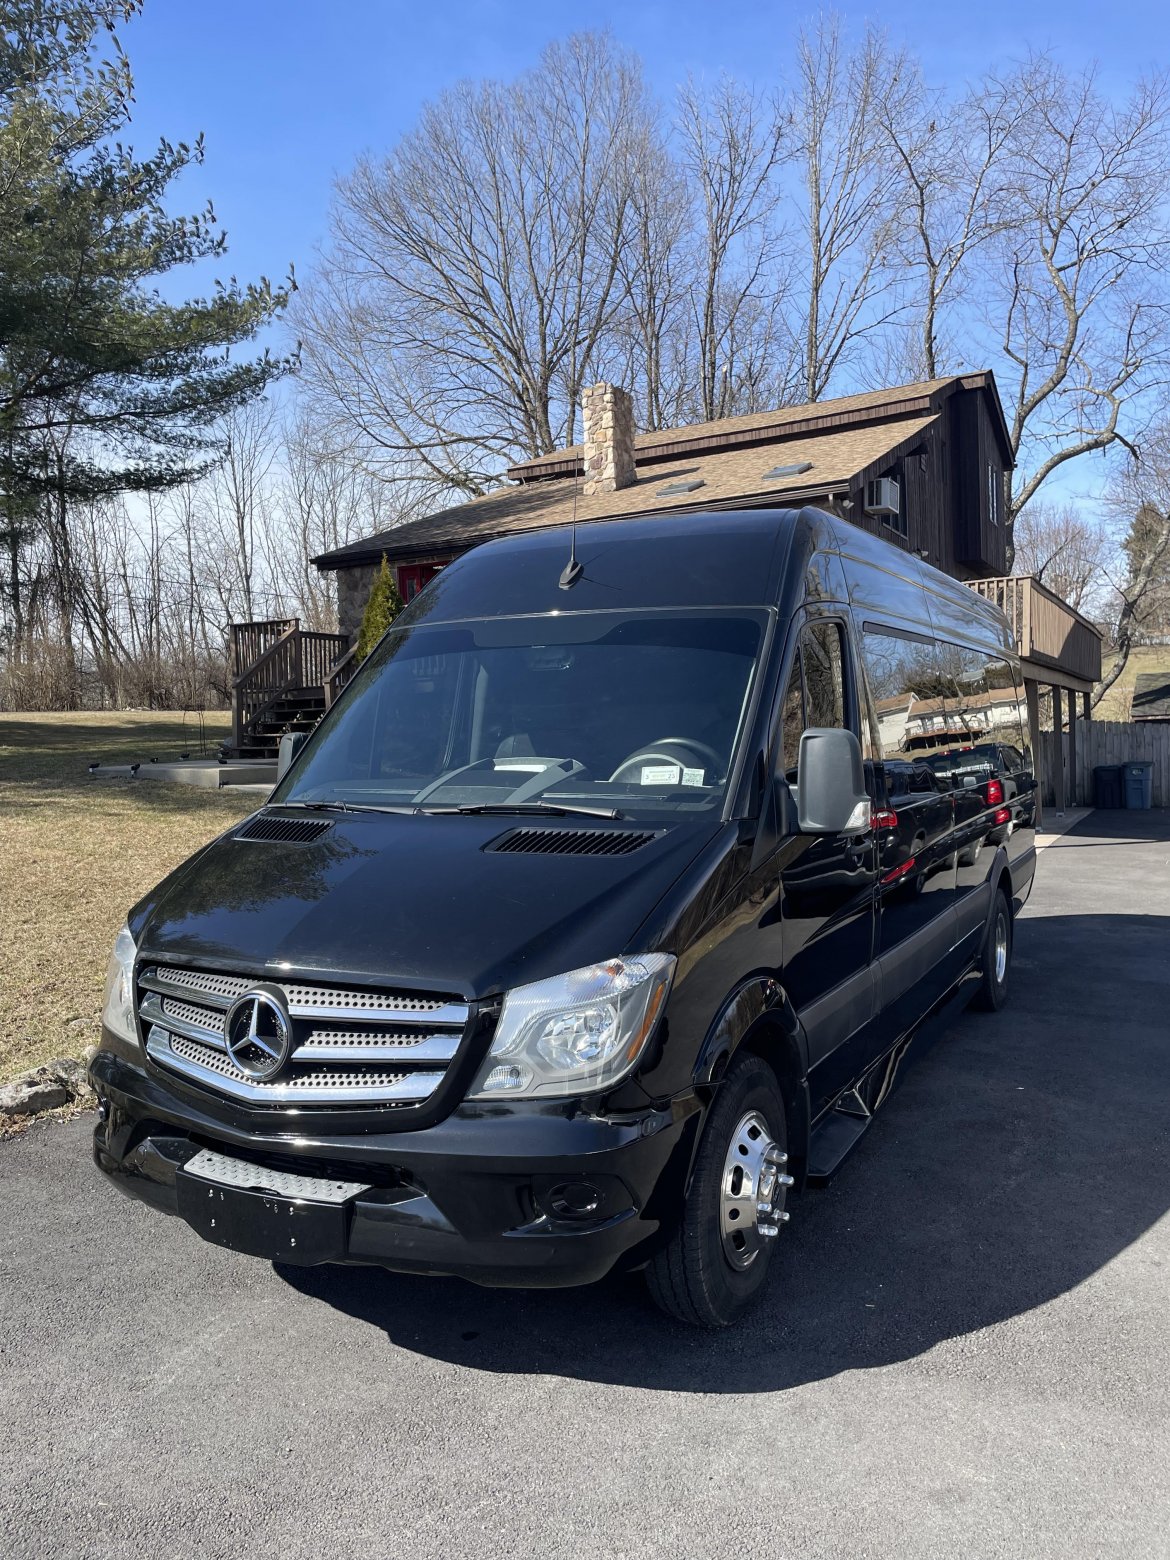 Limo Bus for sale: 2018 Mercedes-Benz Sprinter by LGE Coach-Works